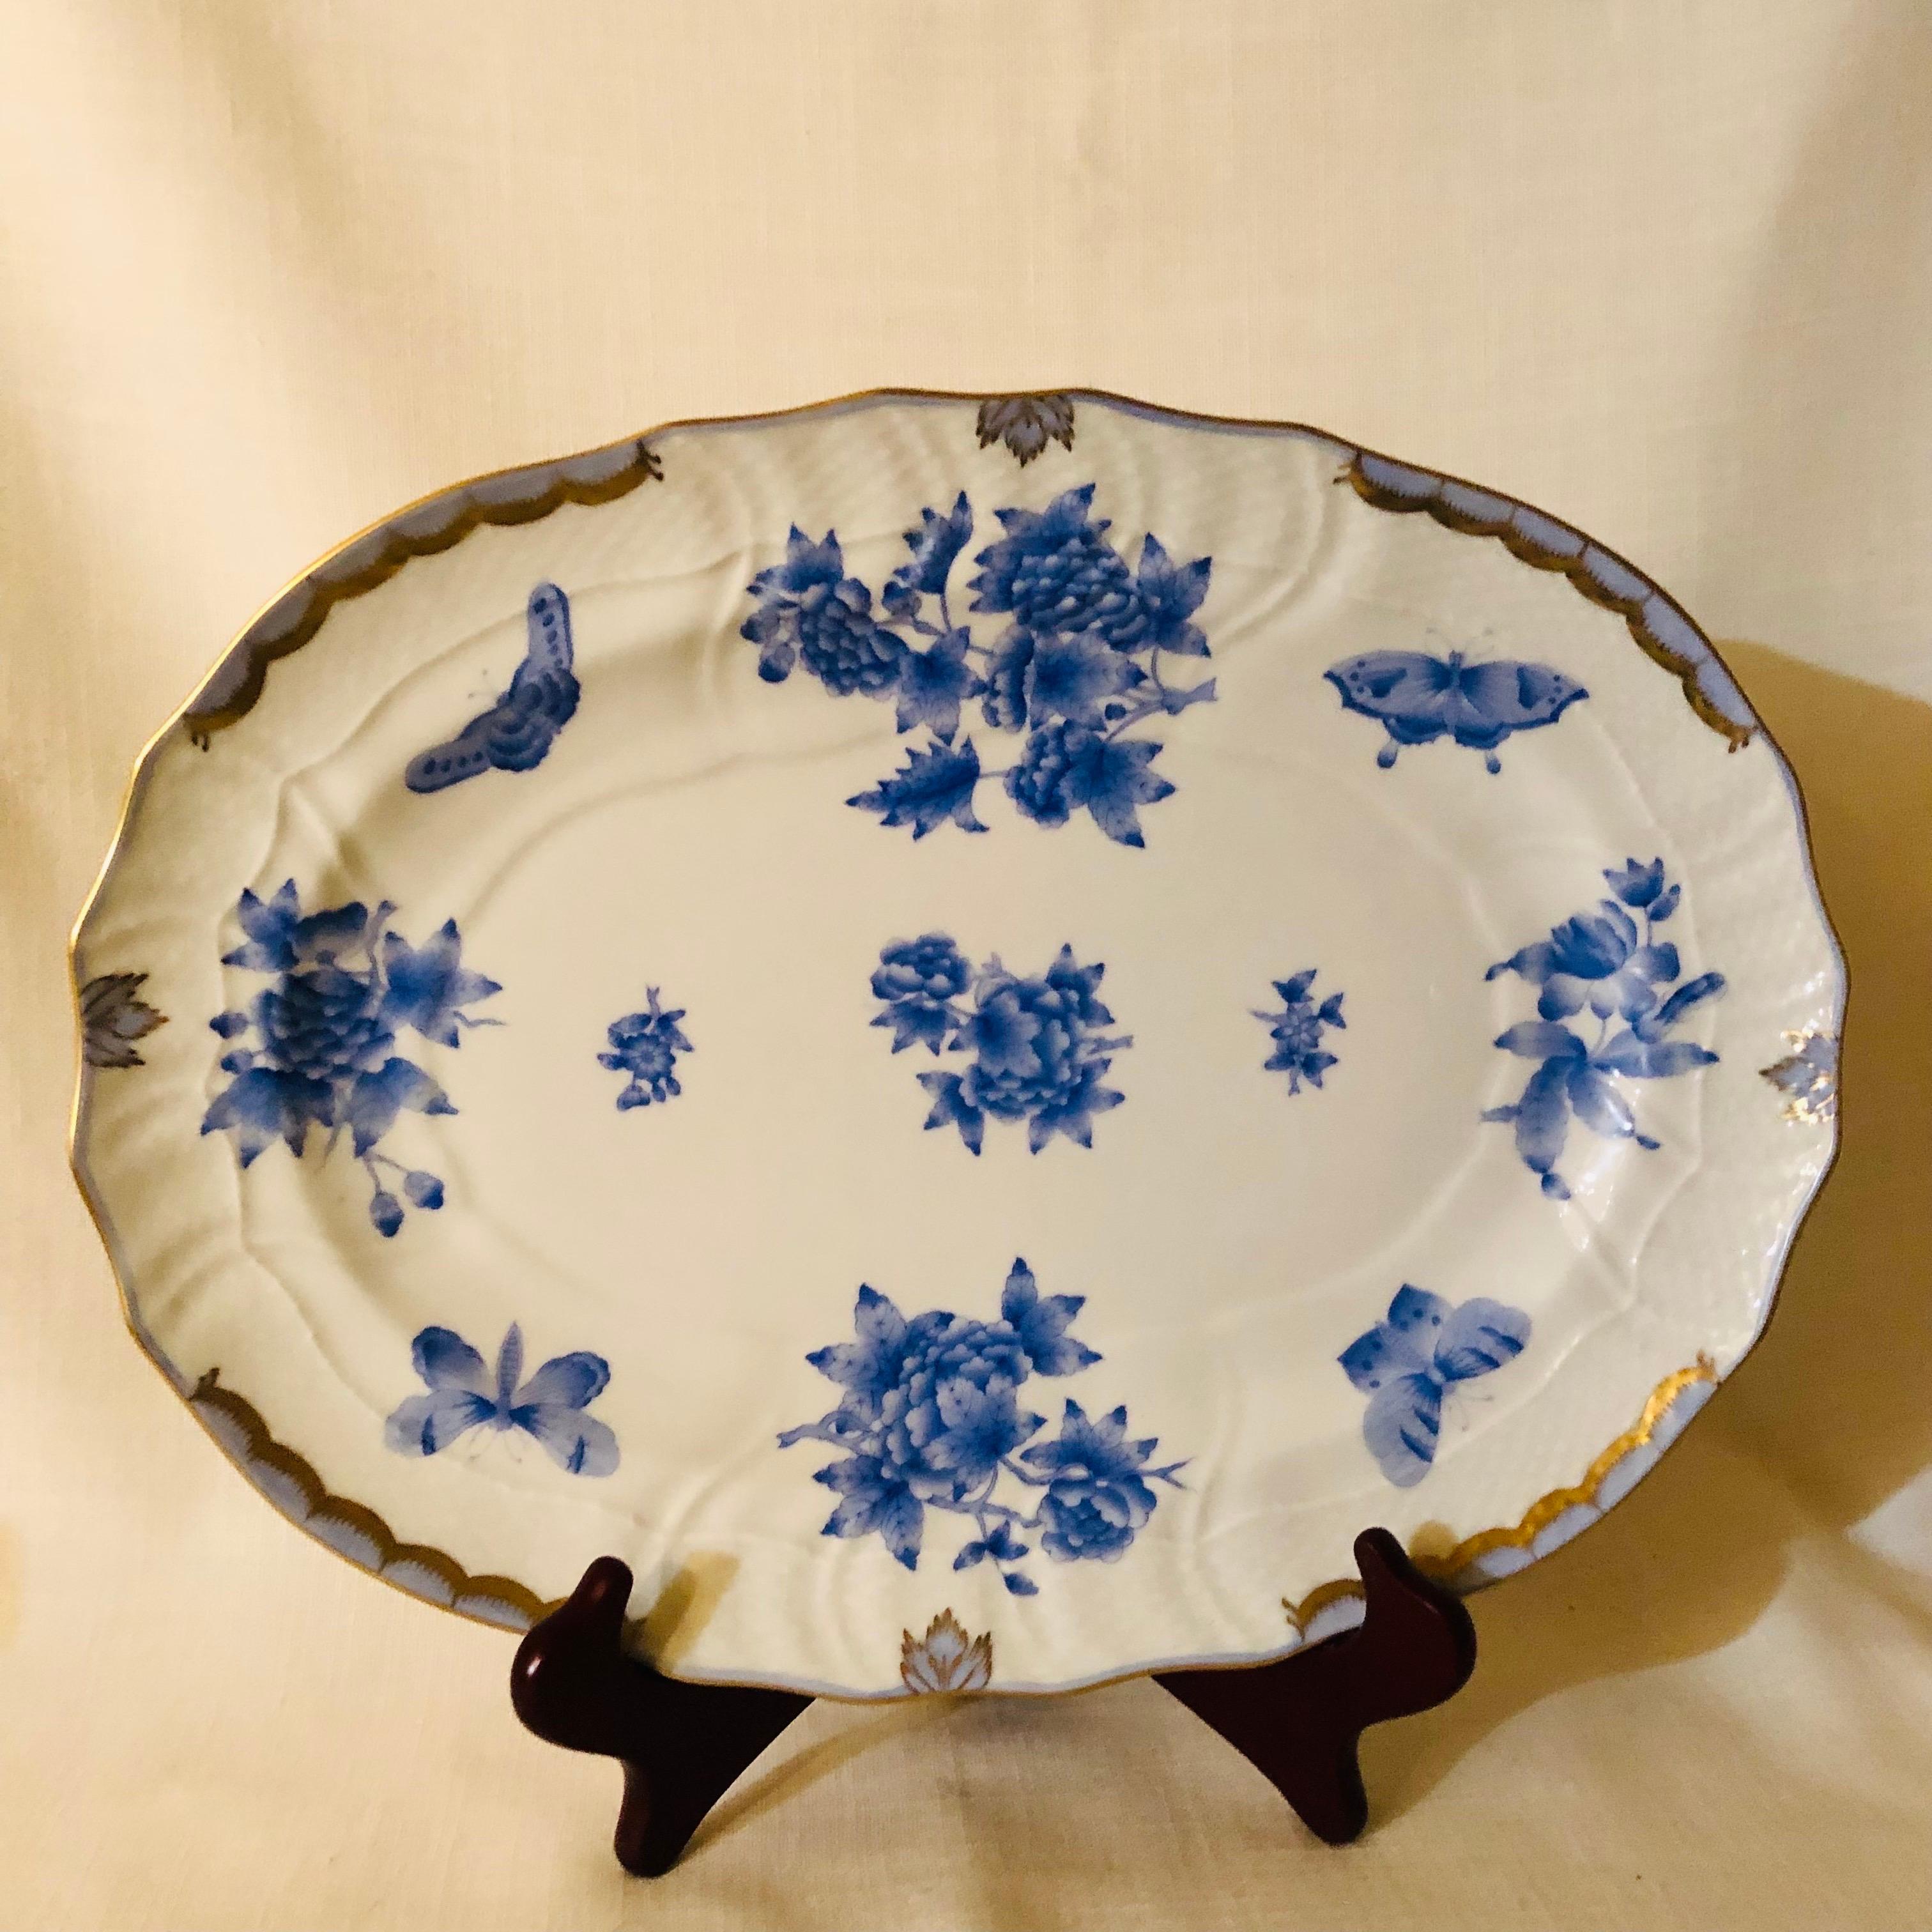 This is a fabulous Herend Fortuna 17 inch oval platter hand-painted with blue butterflies and flowers on a white ground with accents of 24 karat gold. This platter would make a wonderful addition to your dinner service to serve any delicious entree.